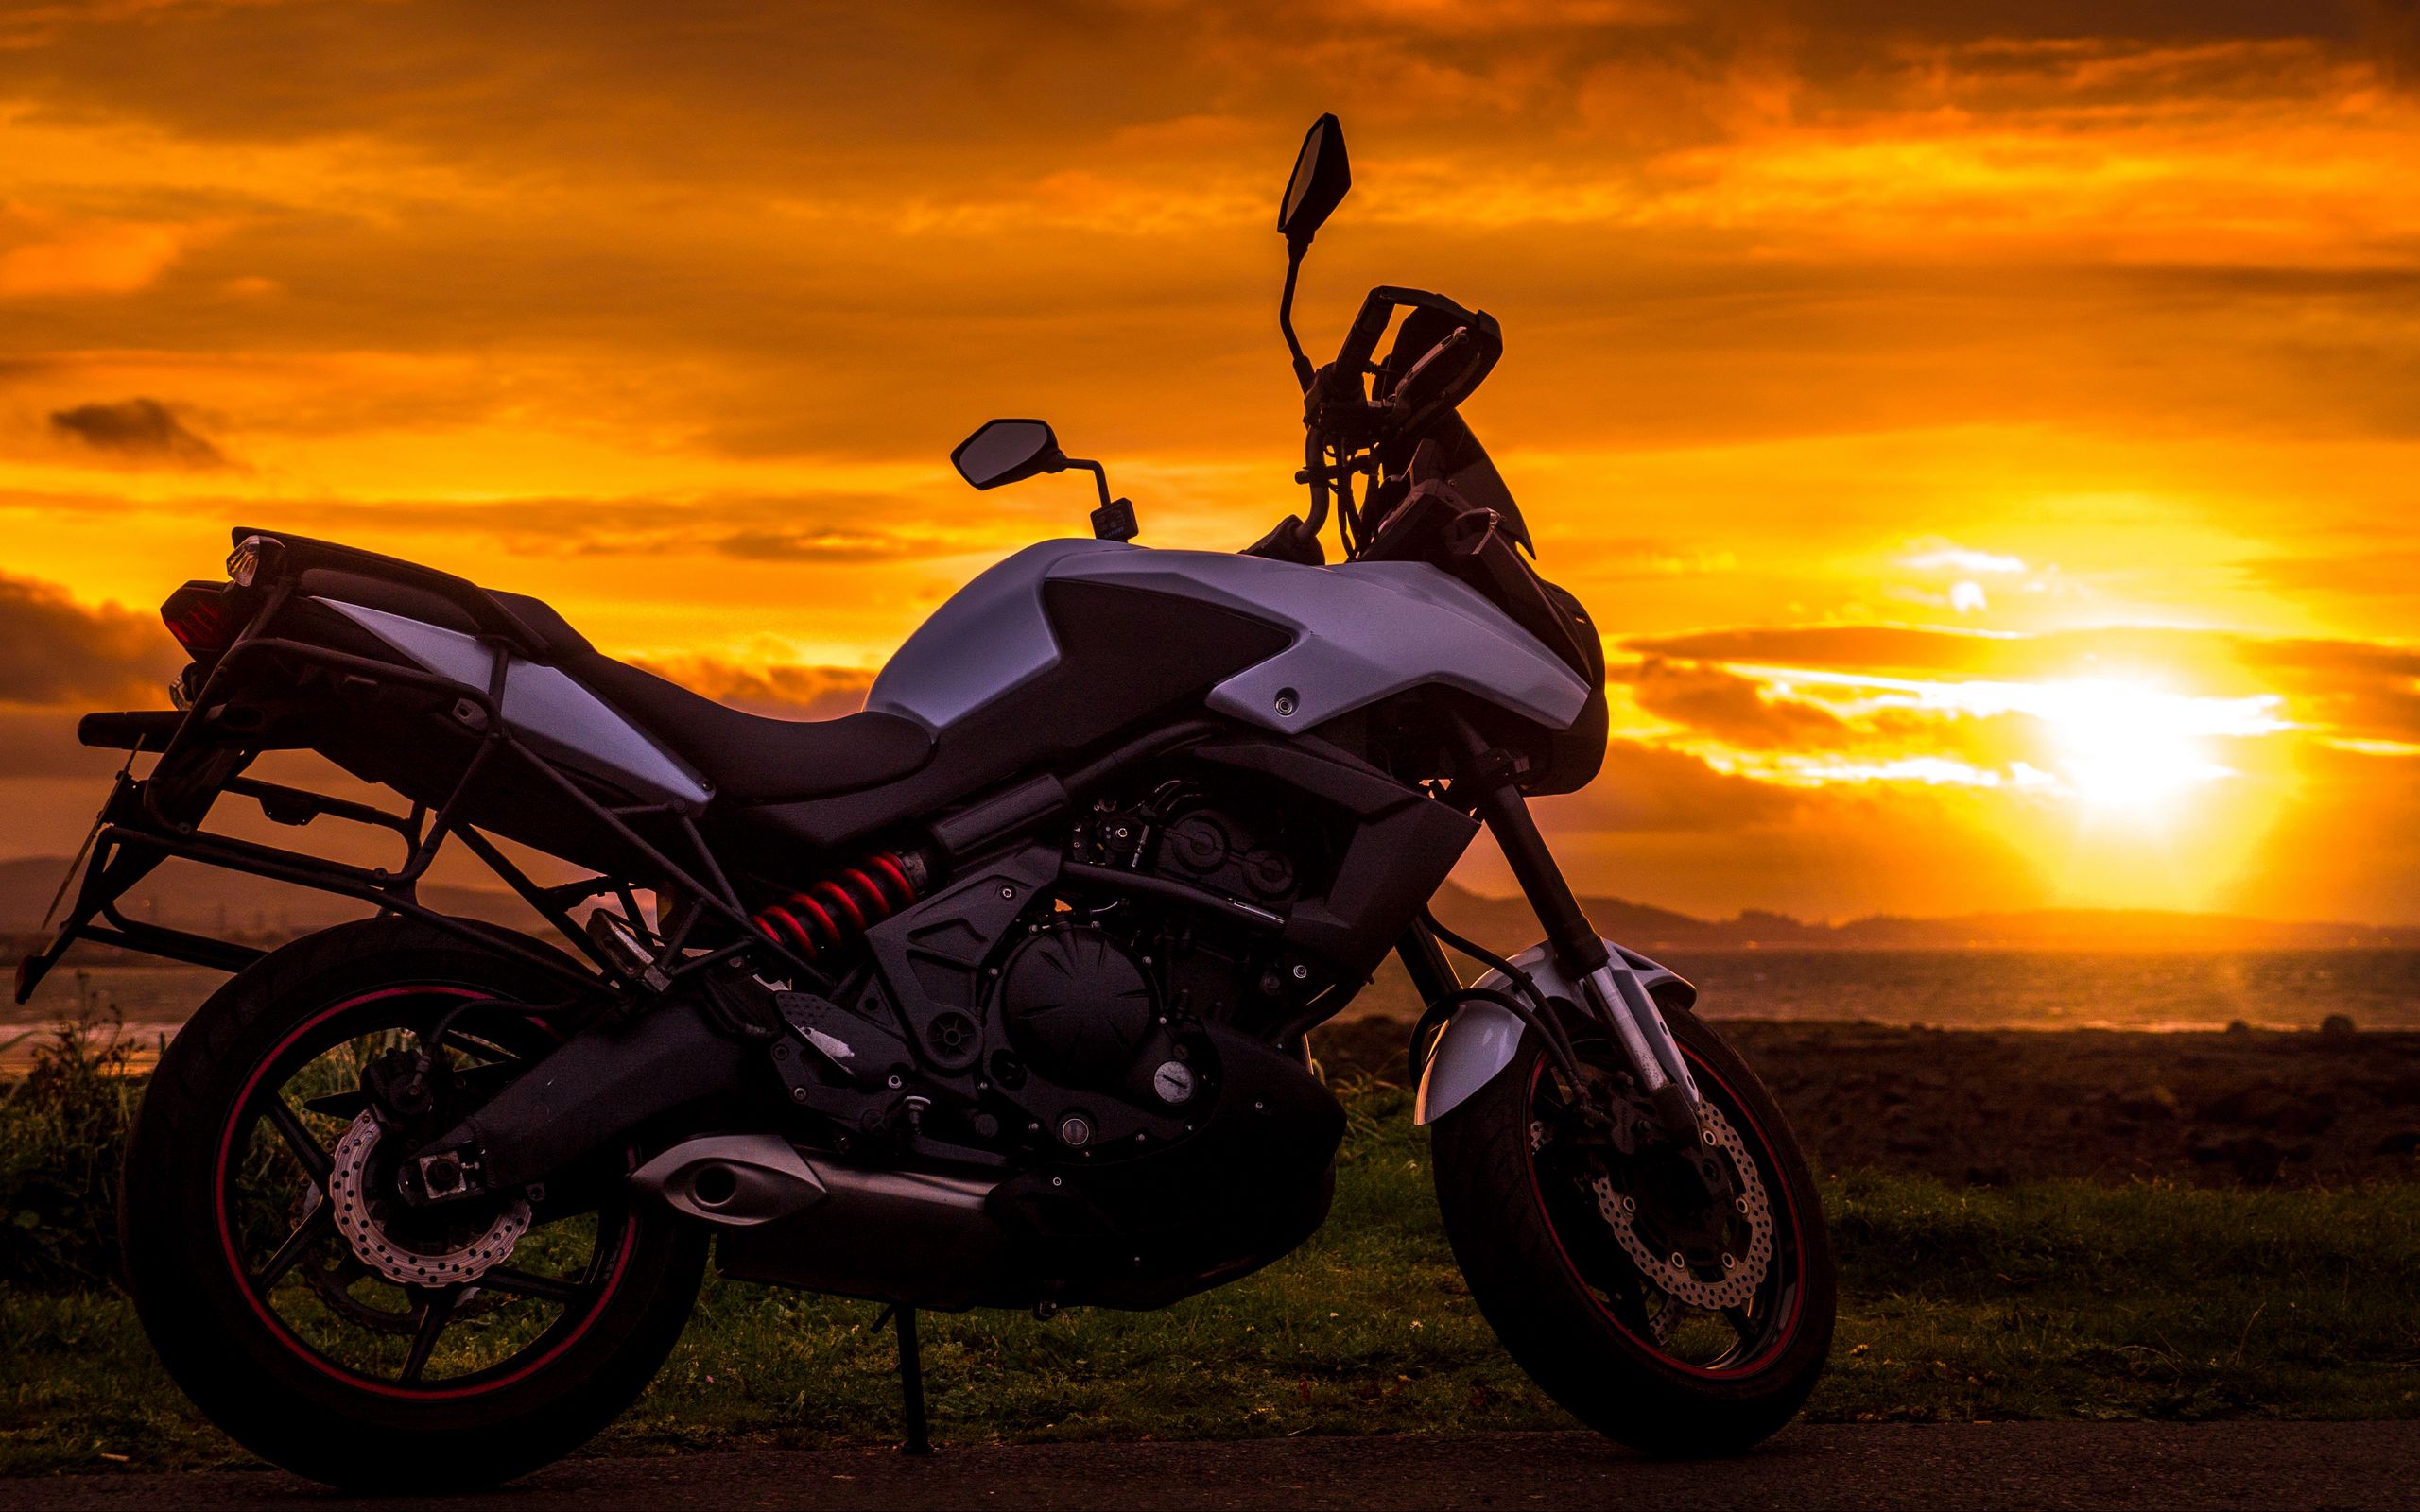 Download wallpaper 2560x1600 motorcycle, sunset, style widescreen 16:10 hd  background